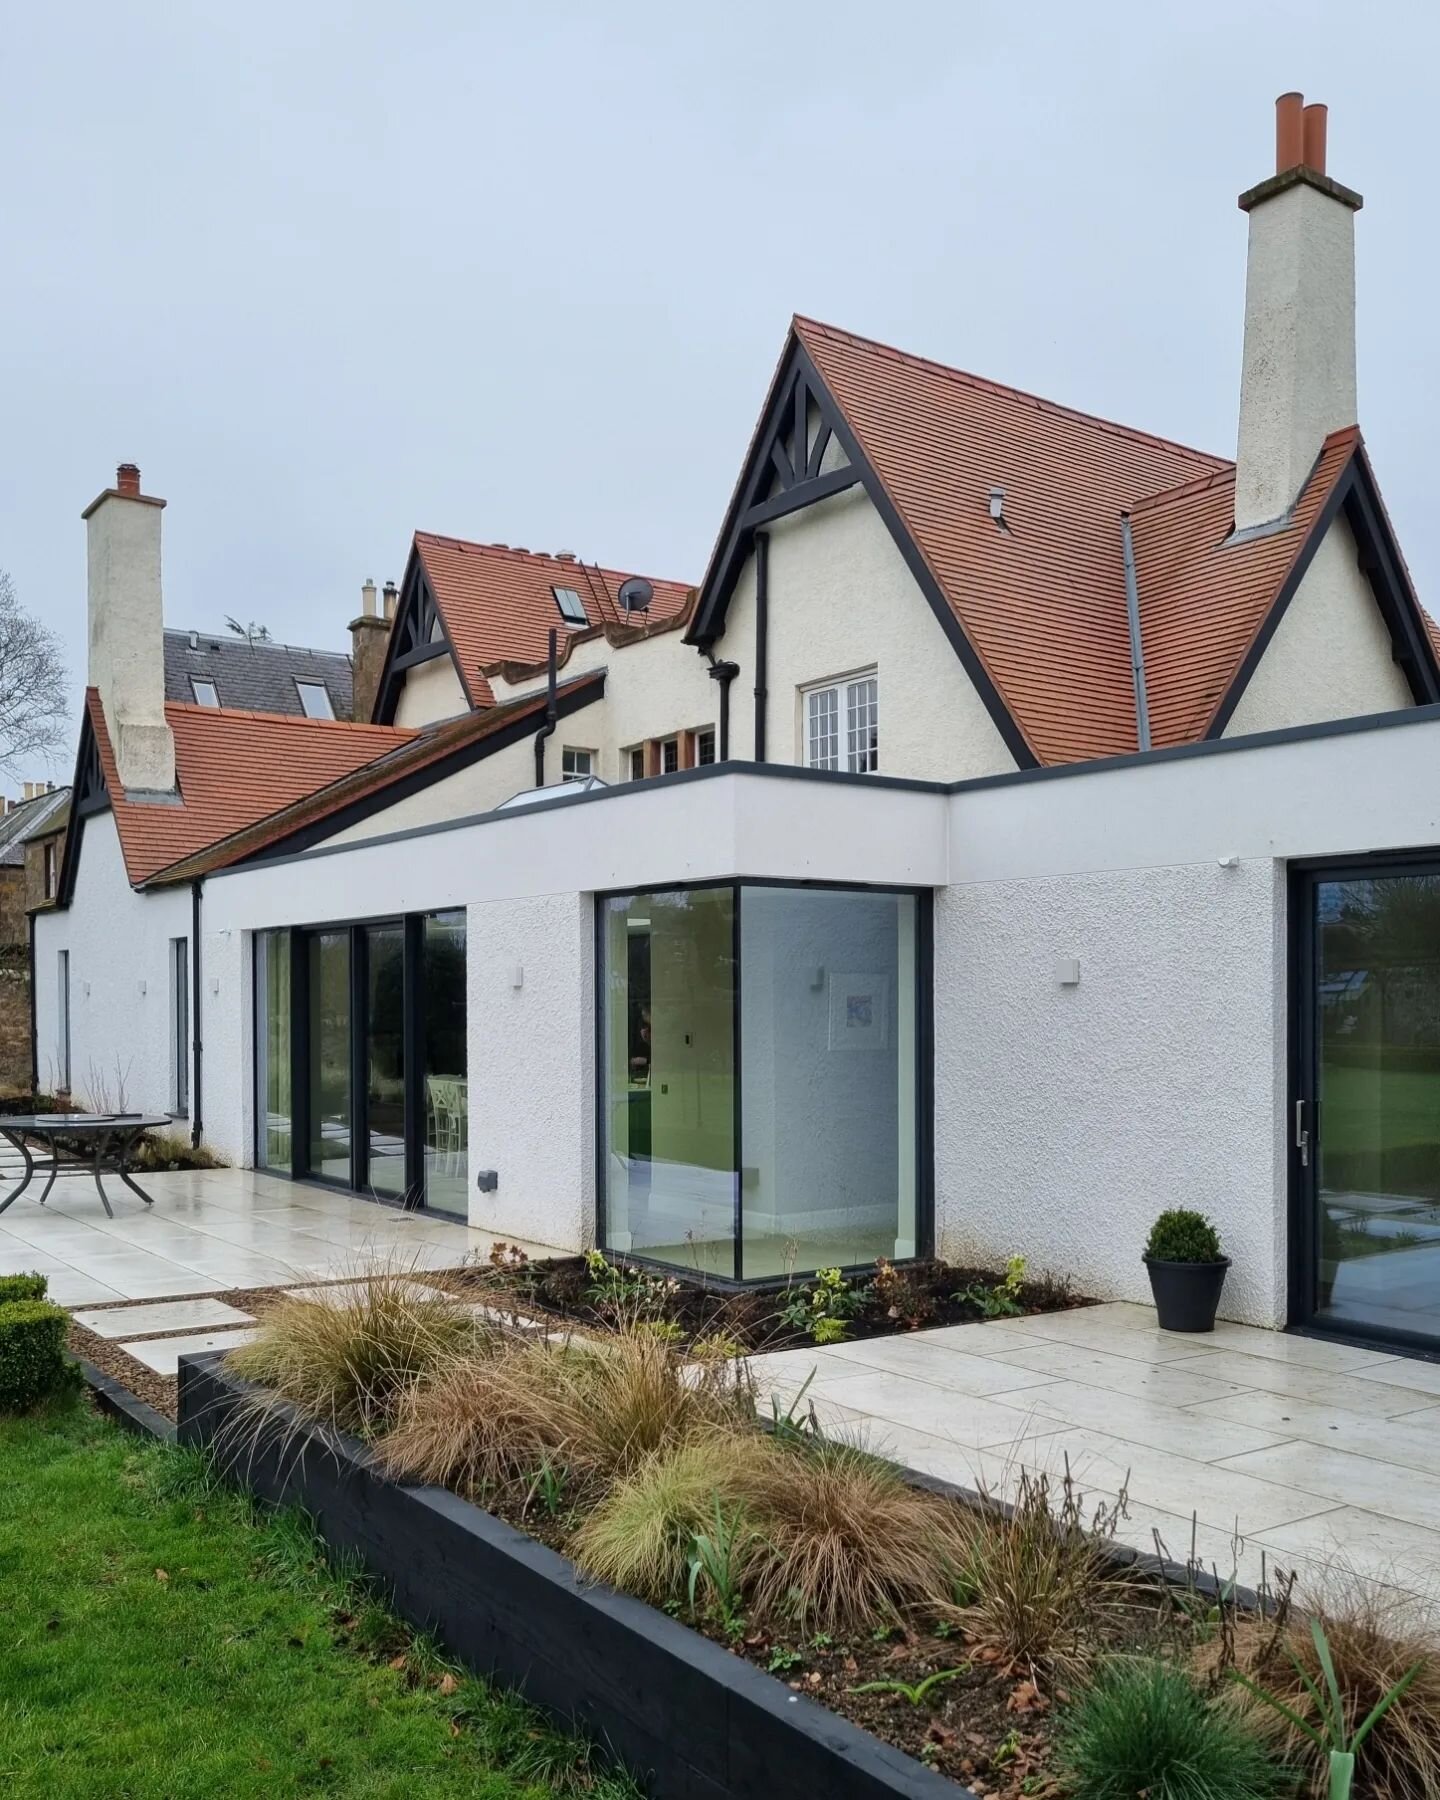 Back at our Haddington project for the final sign off.

Great to see the landscape coming in and the interiors and furnishings come together. Hopefully we will photograph it properly in the summer!